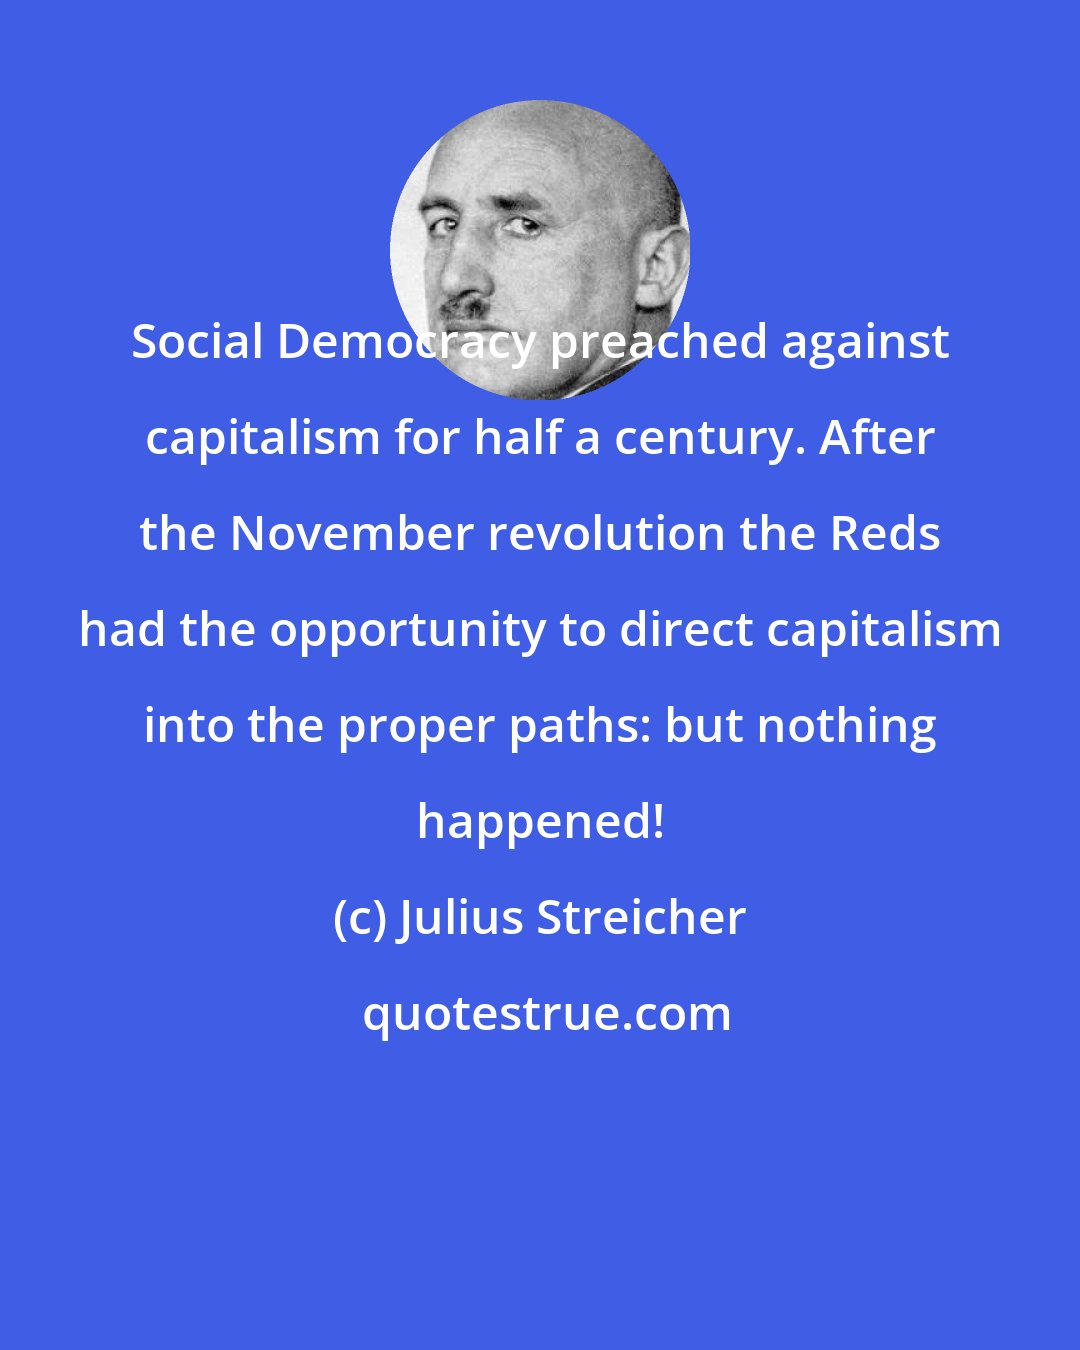 Julius Streicher: Social Democracy preached against capitalism for half a century. After the November revolution the Reds had the opportunity to direct capitalism into the proper paths: but nothing happened!